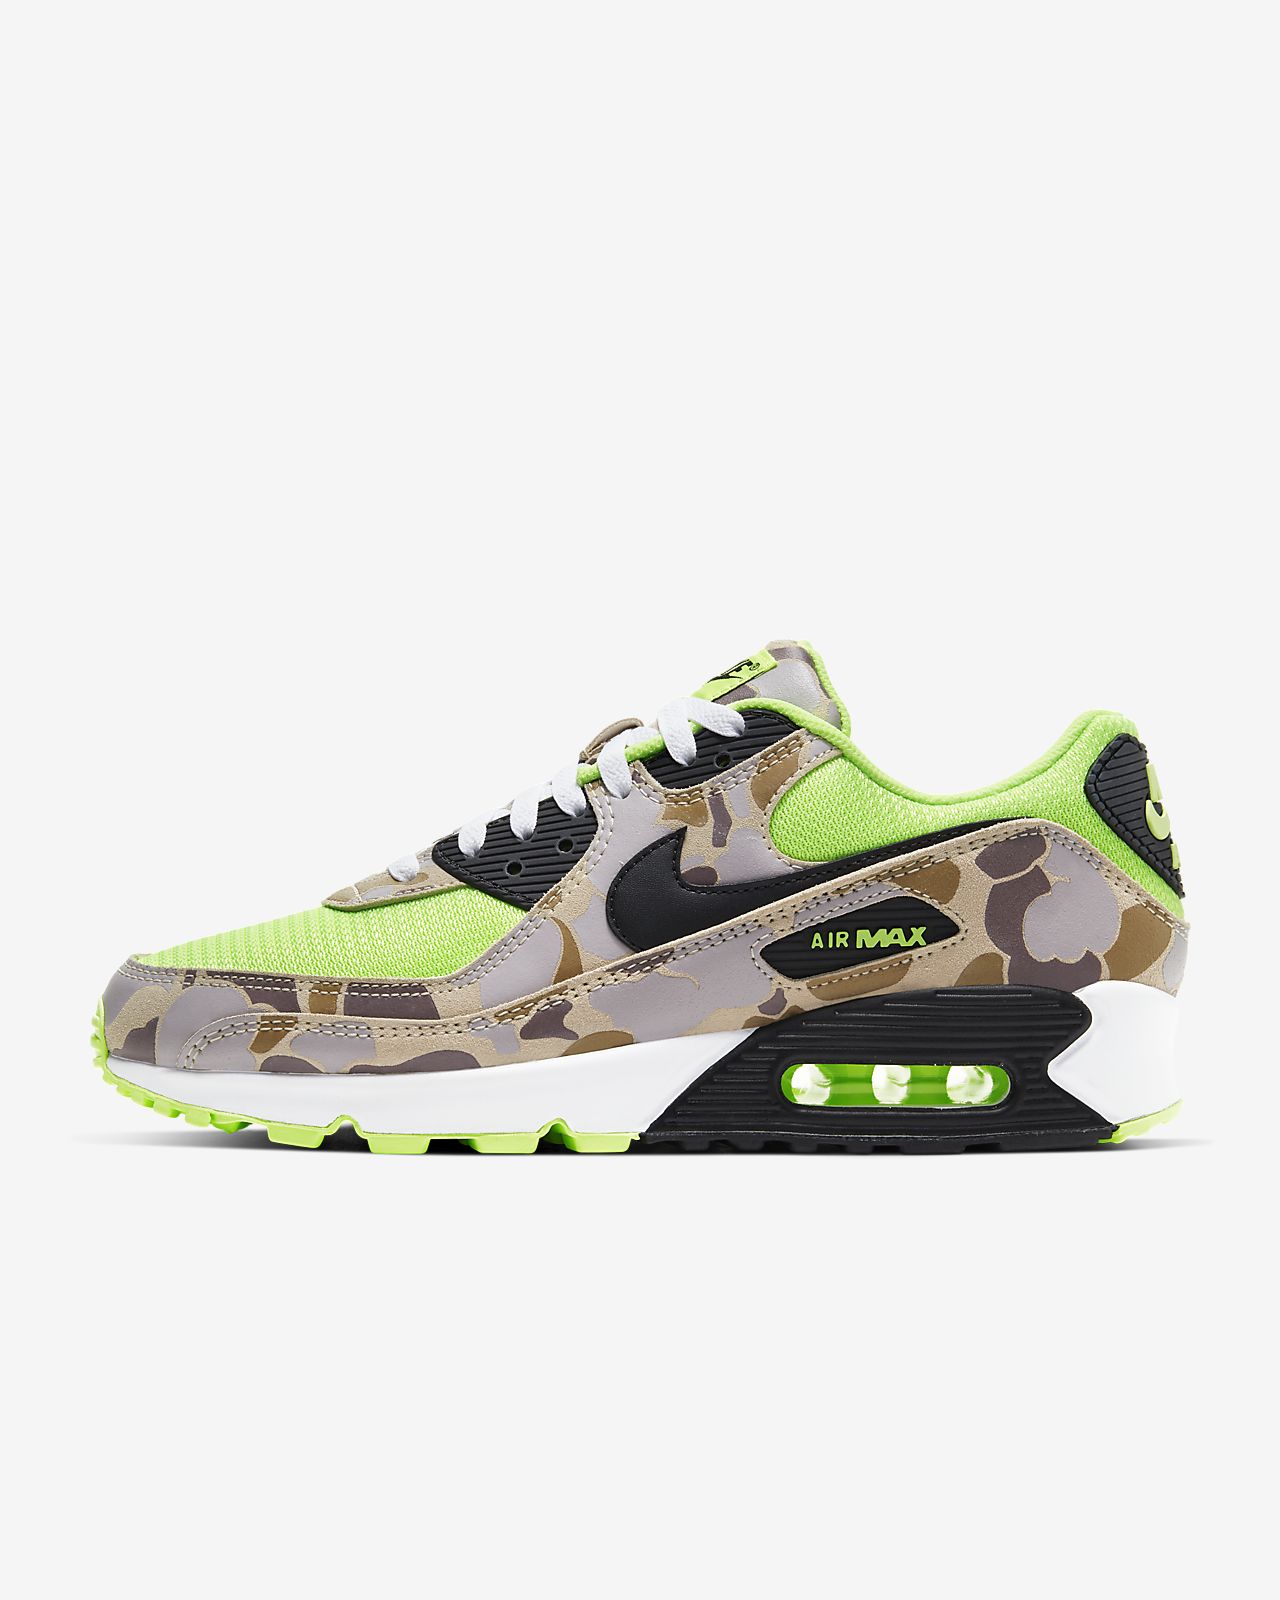 Now Available Nike Air Max 90 SP Green Camo Sneaker